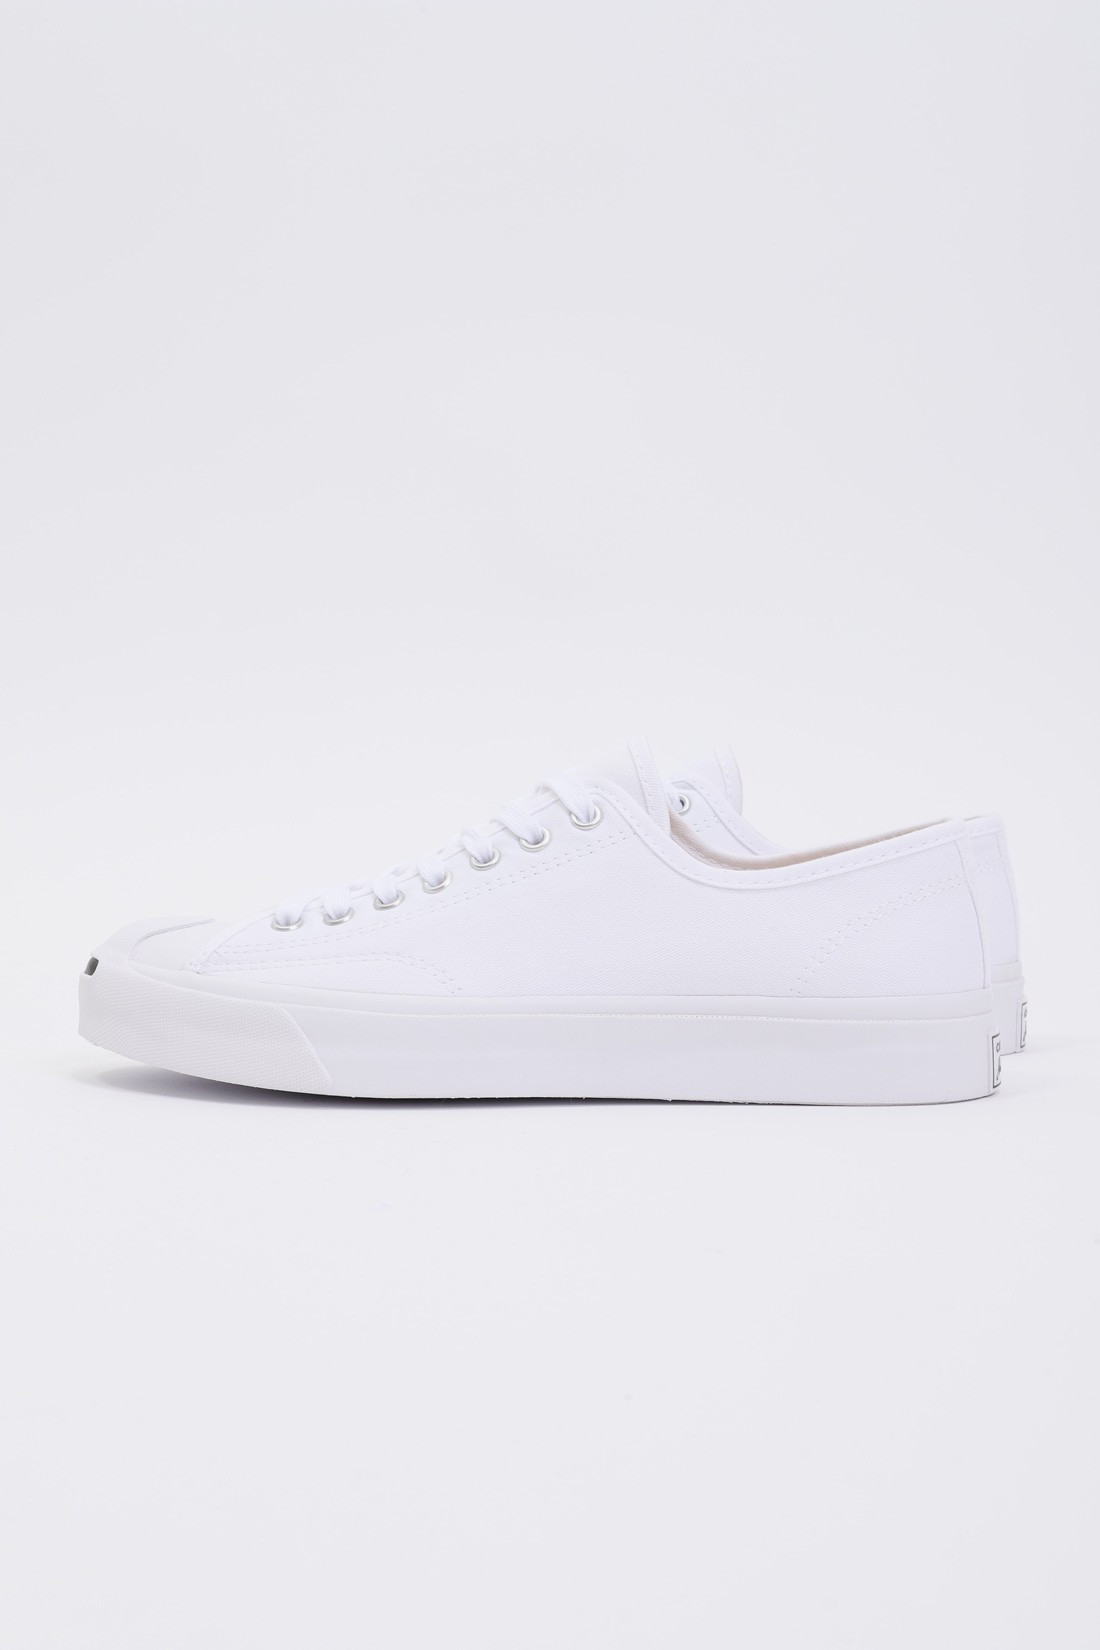 CONVERSE / Jack purcell ox White